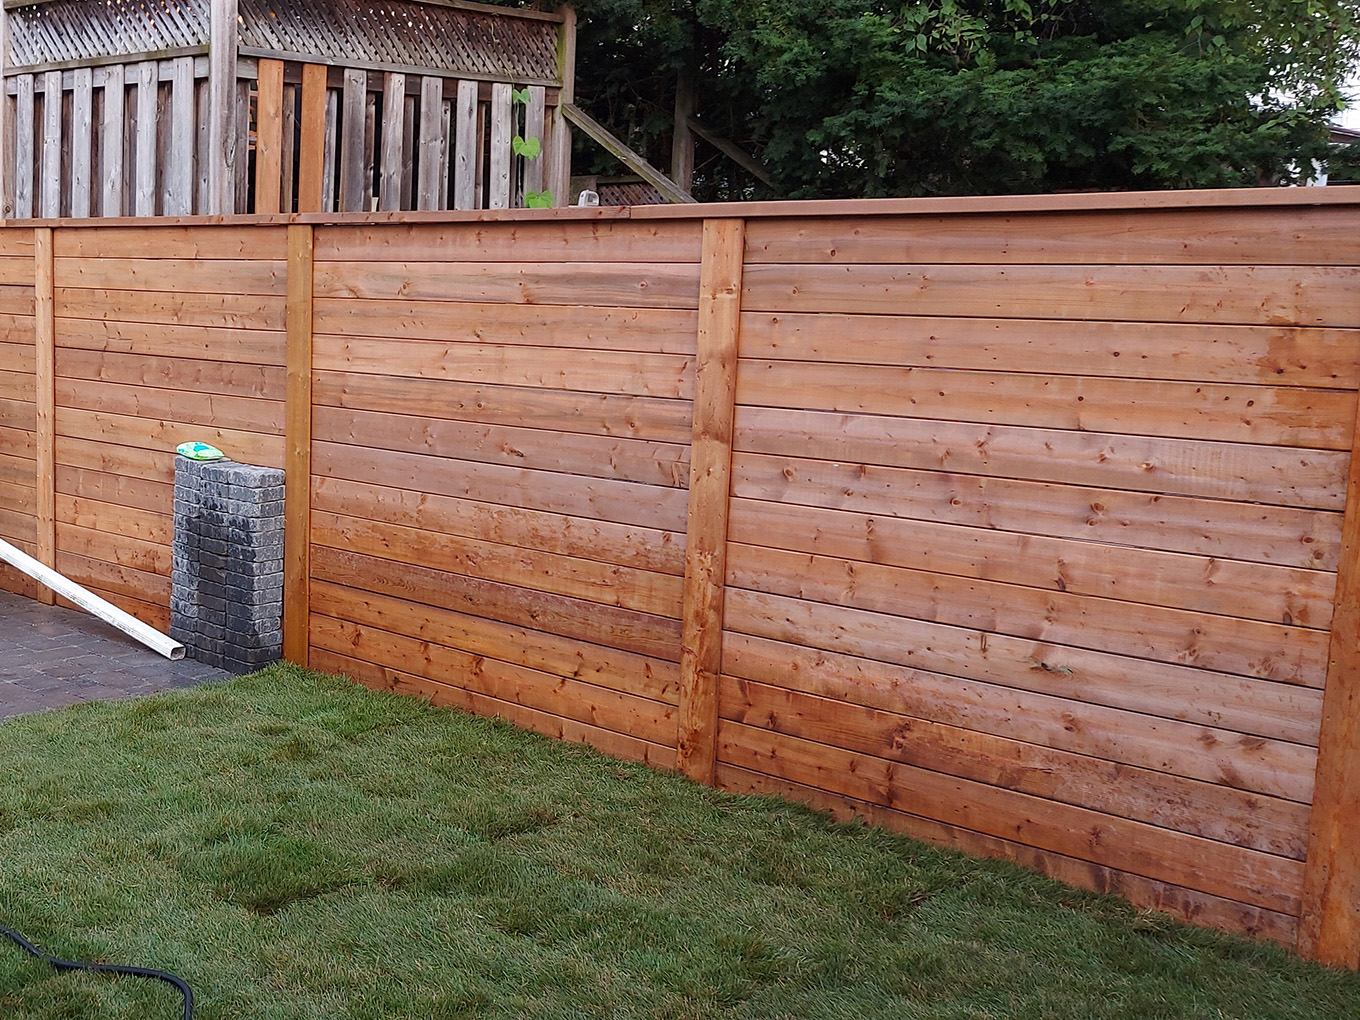 Mississauga ON cap and trim style wood fence